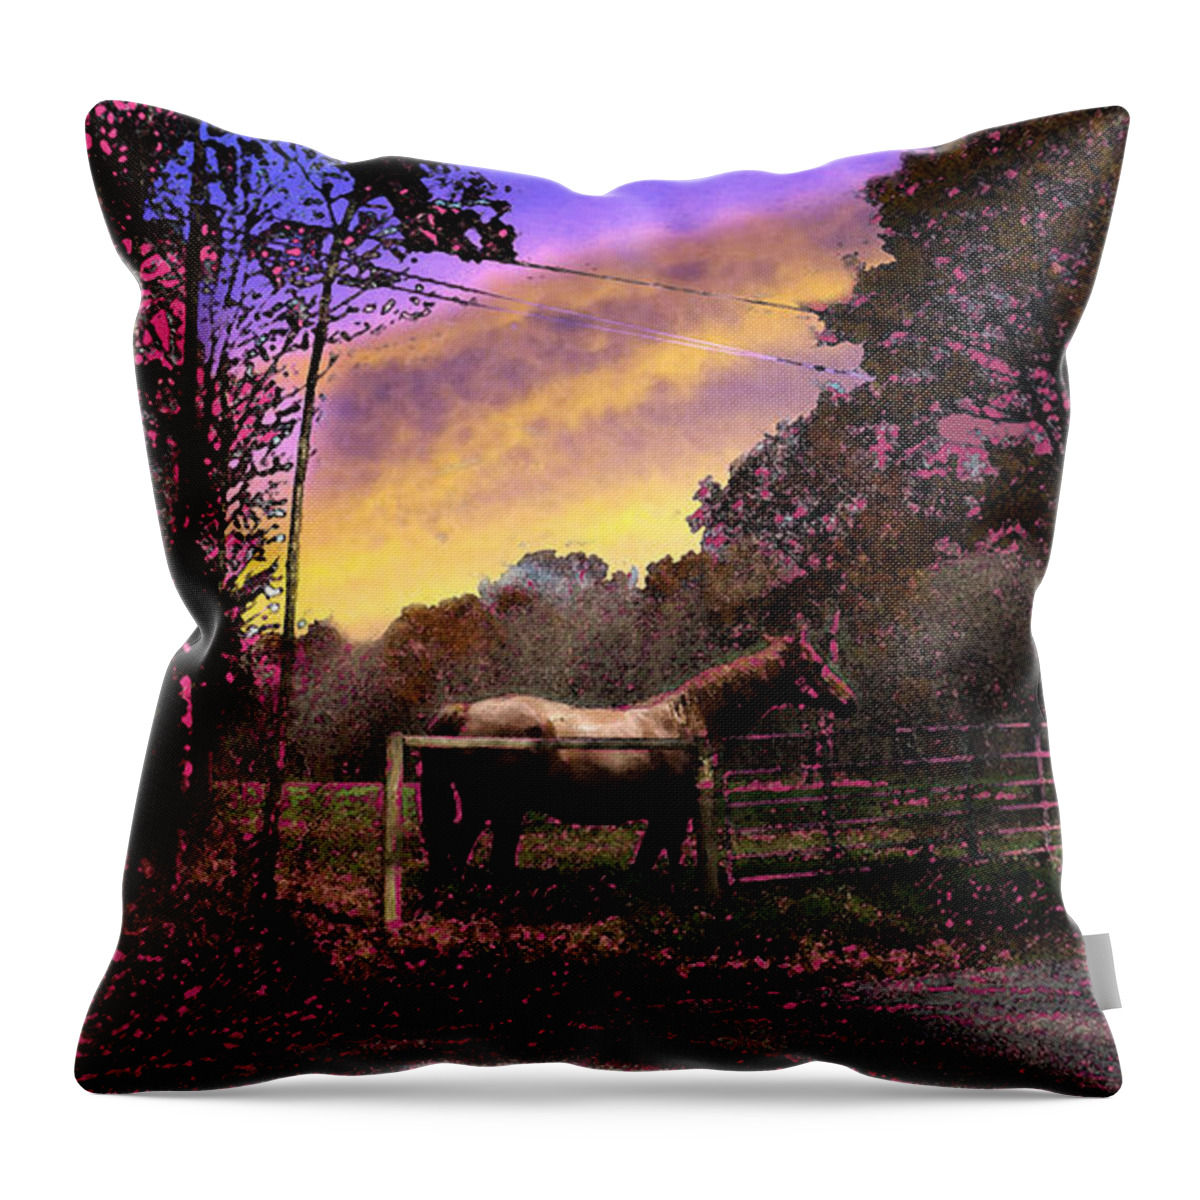 Horse Throw Pillow featuring the digital art Waiting For The Master by Joyce Wasser